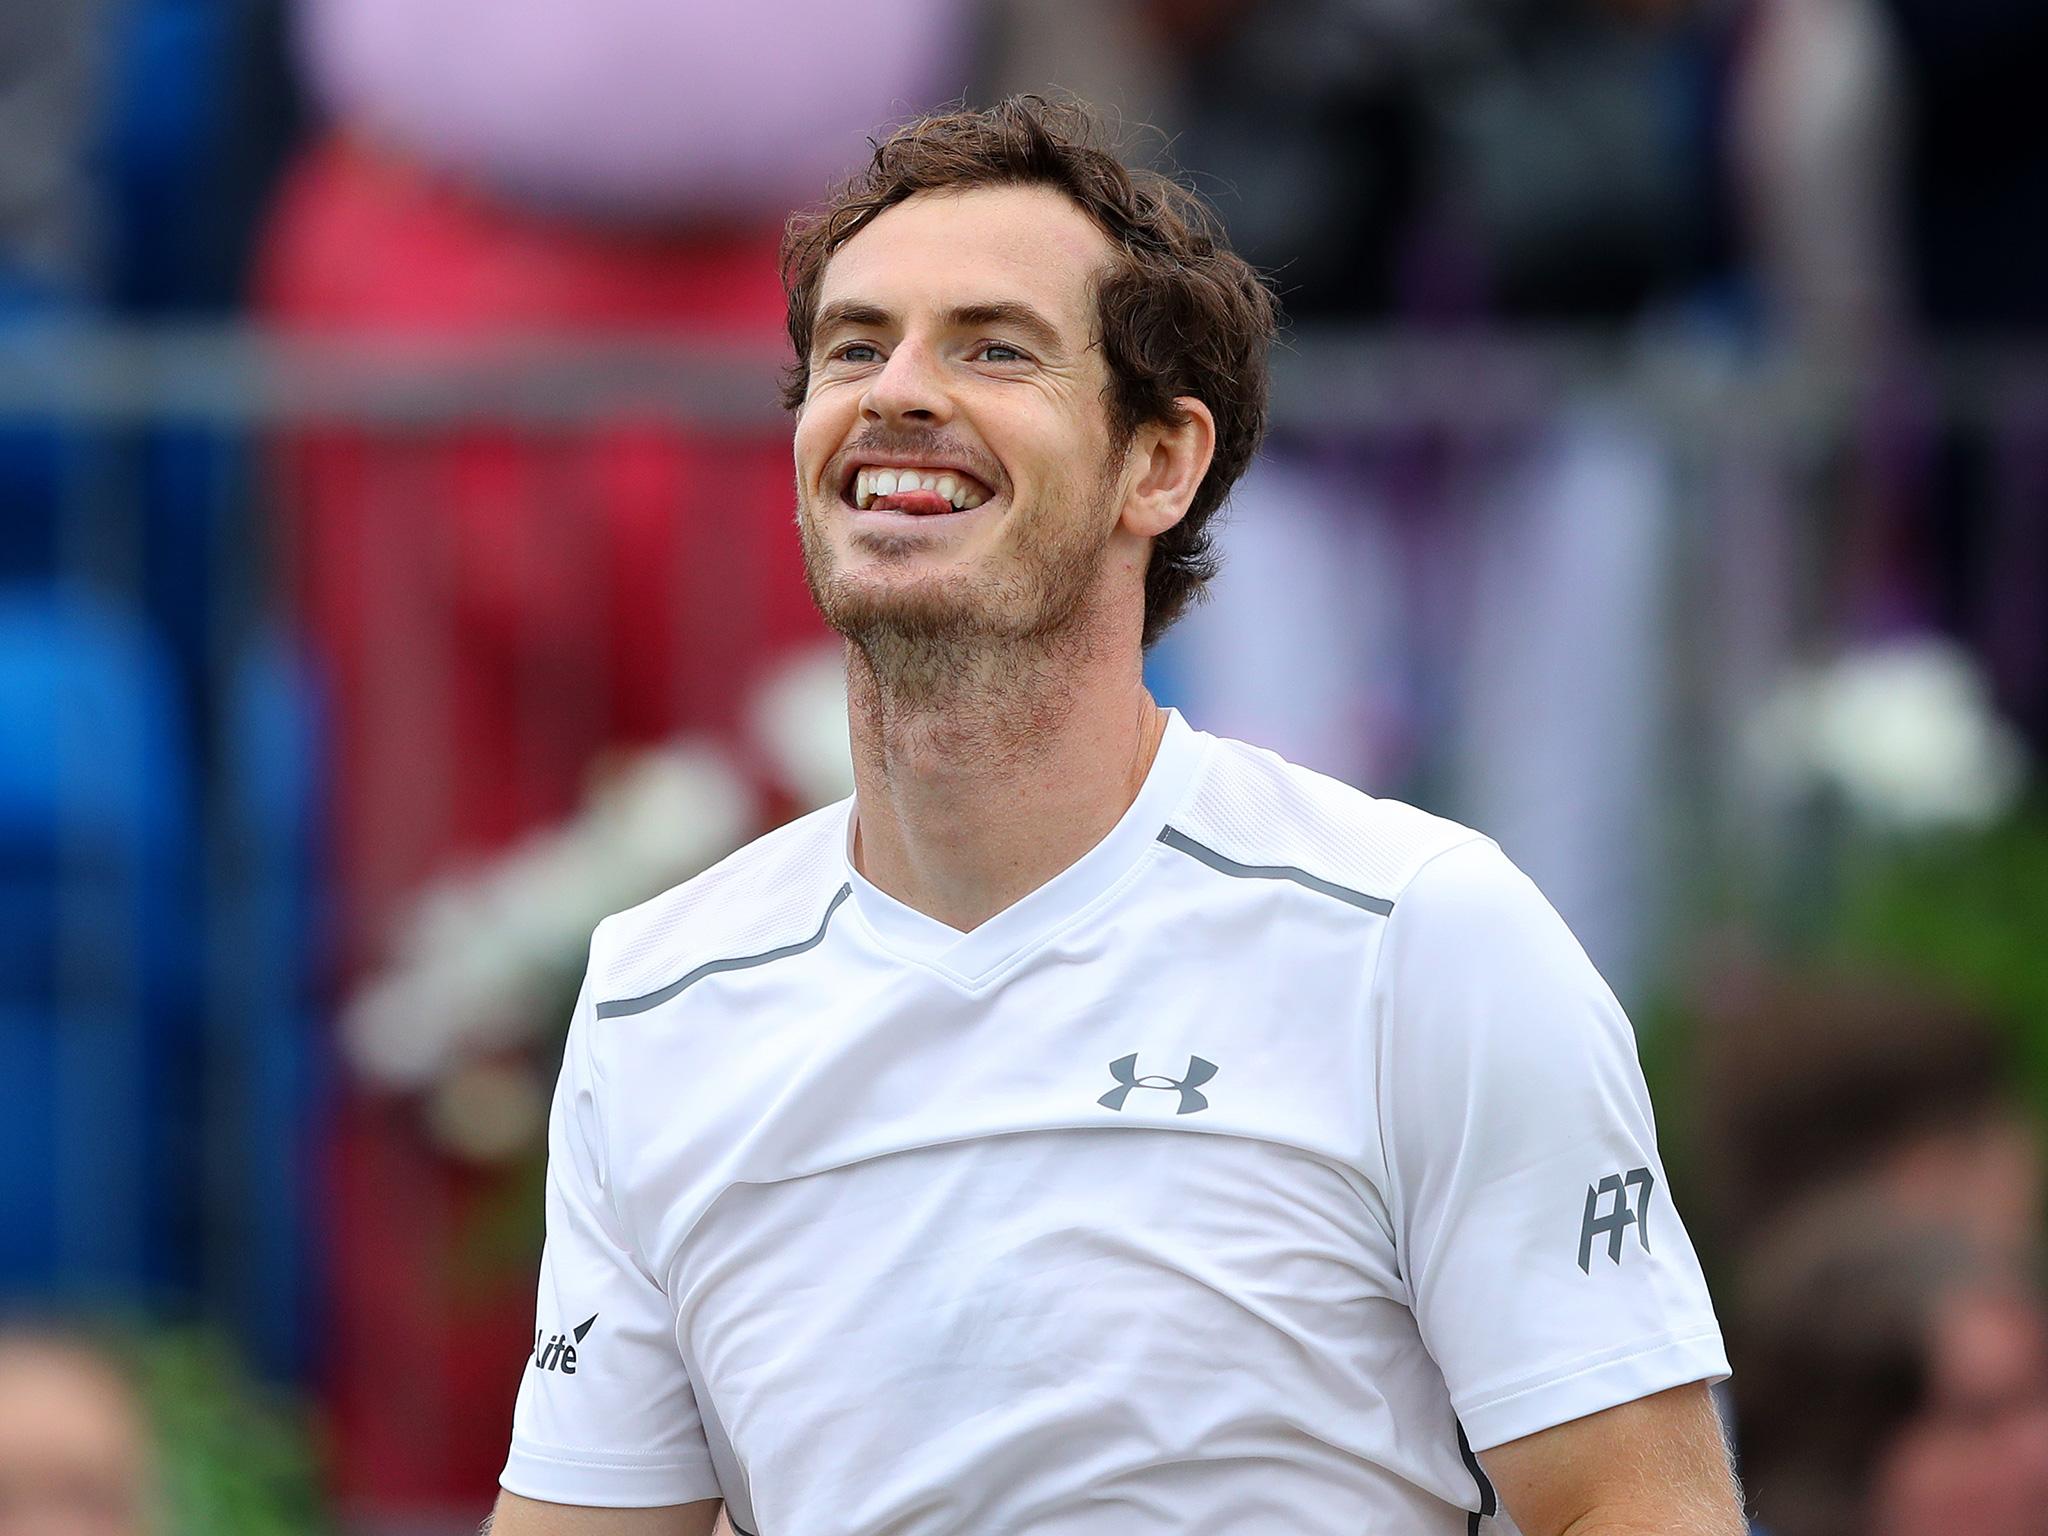 Murray will face a fellow Briton in a Grand Slam for the first time